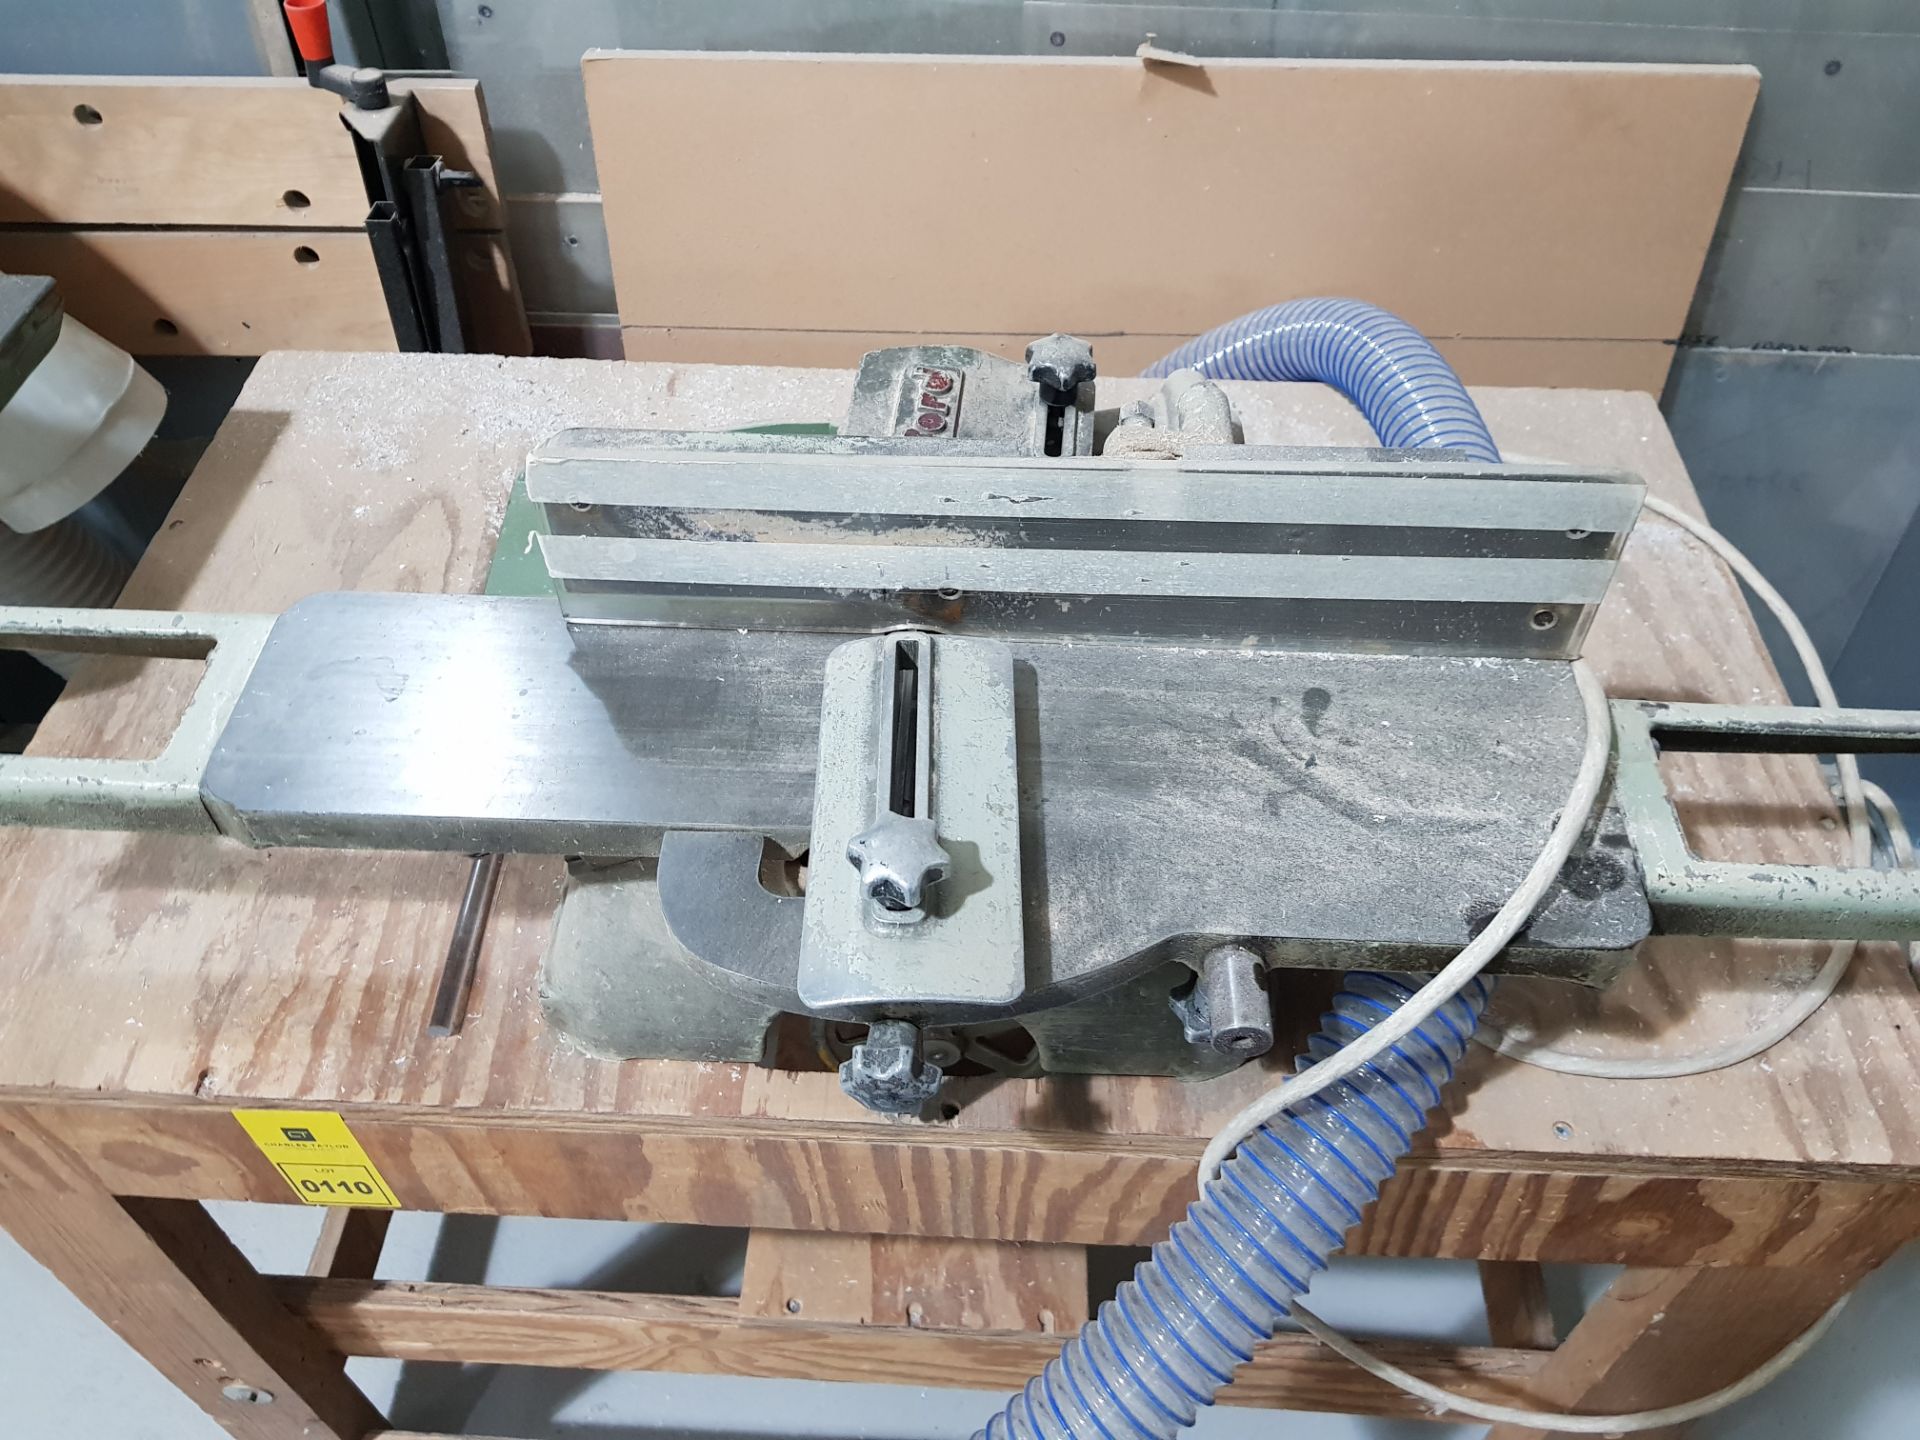 MYFORD ADJUSTABLE ENGINEERING PLANER AND STAND - Image 2 of 4